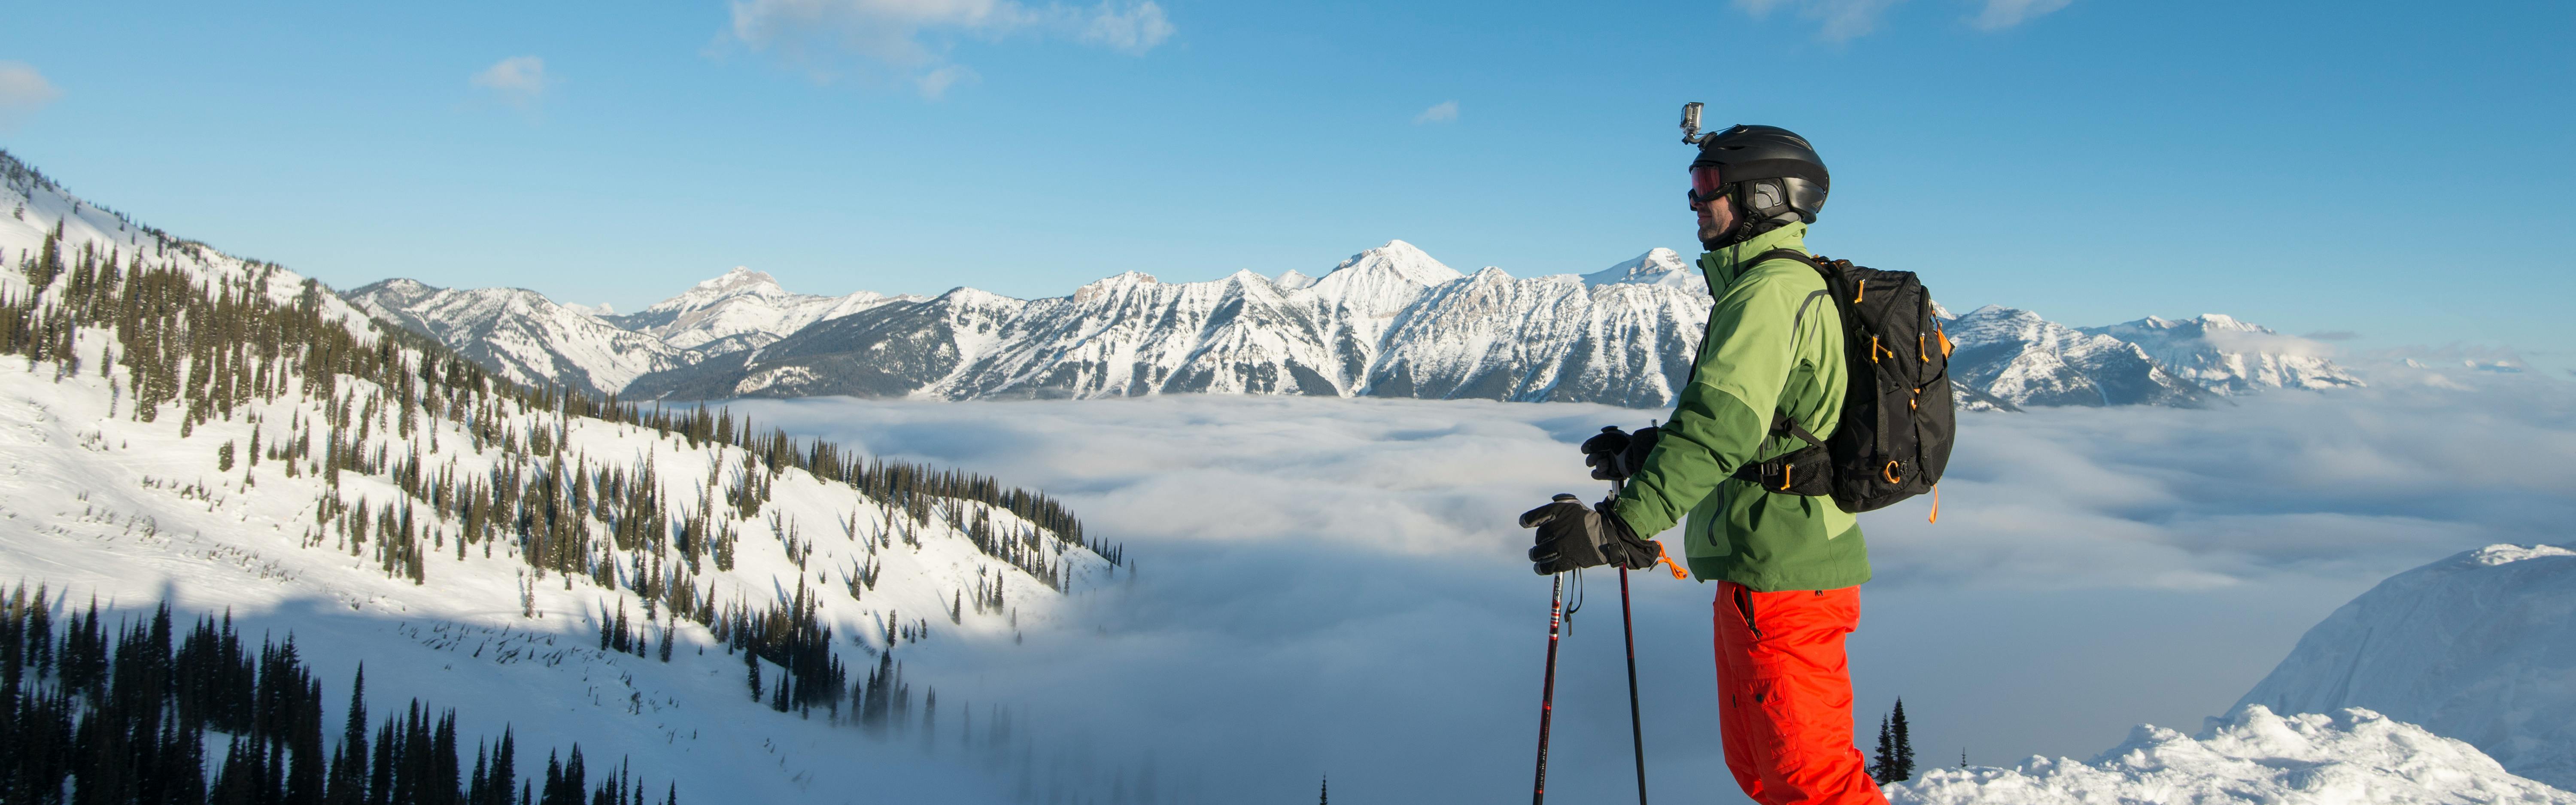 A skier stands on a ridge and looks out towards mountains in the distance. 